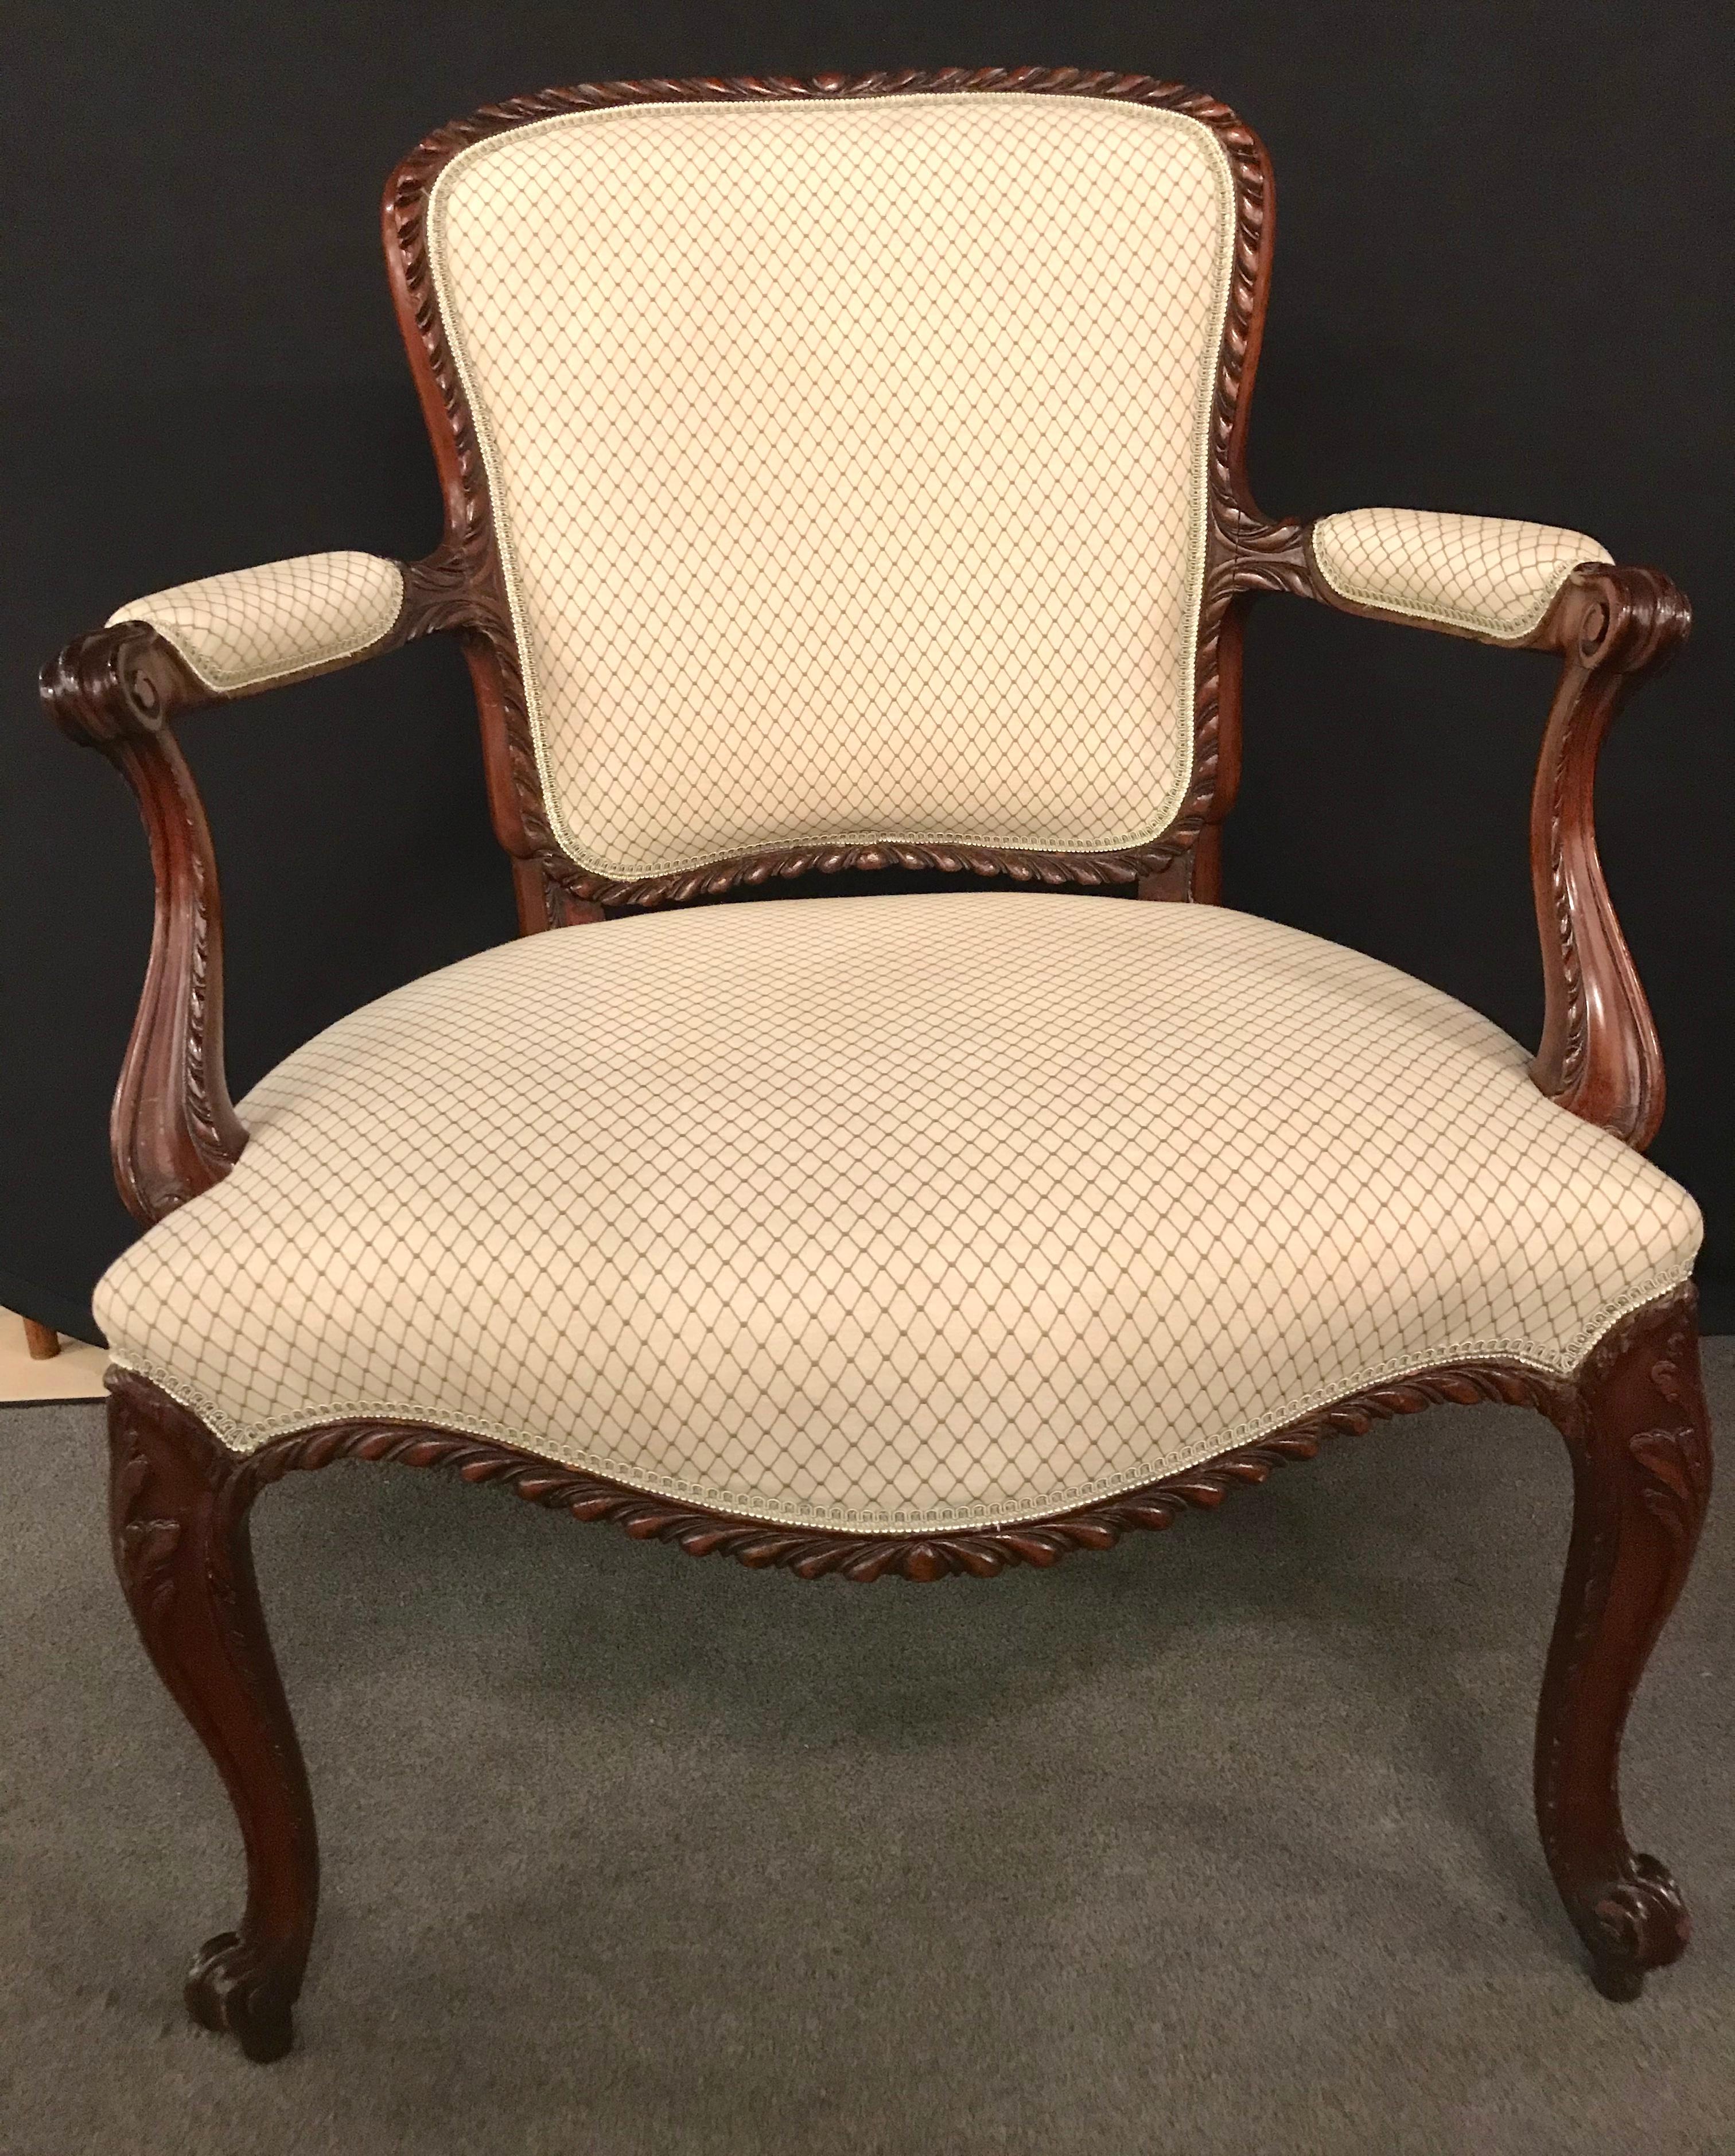 A fine pair of Louis XV style walnut fauteuils or Bergères in a Scalamandre Fabric. A simply understated pair of carved arm chairs in the finest fabric having a stripped fabric in the back with a tweed design seat and backrest.